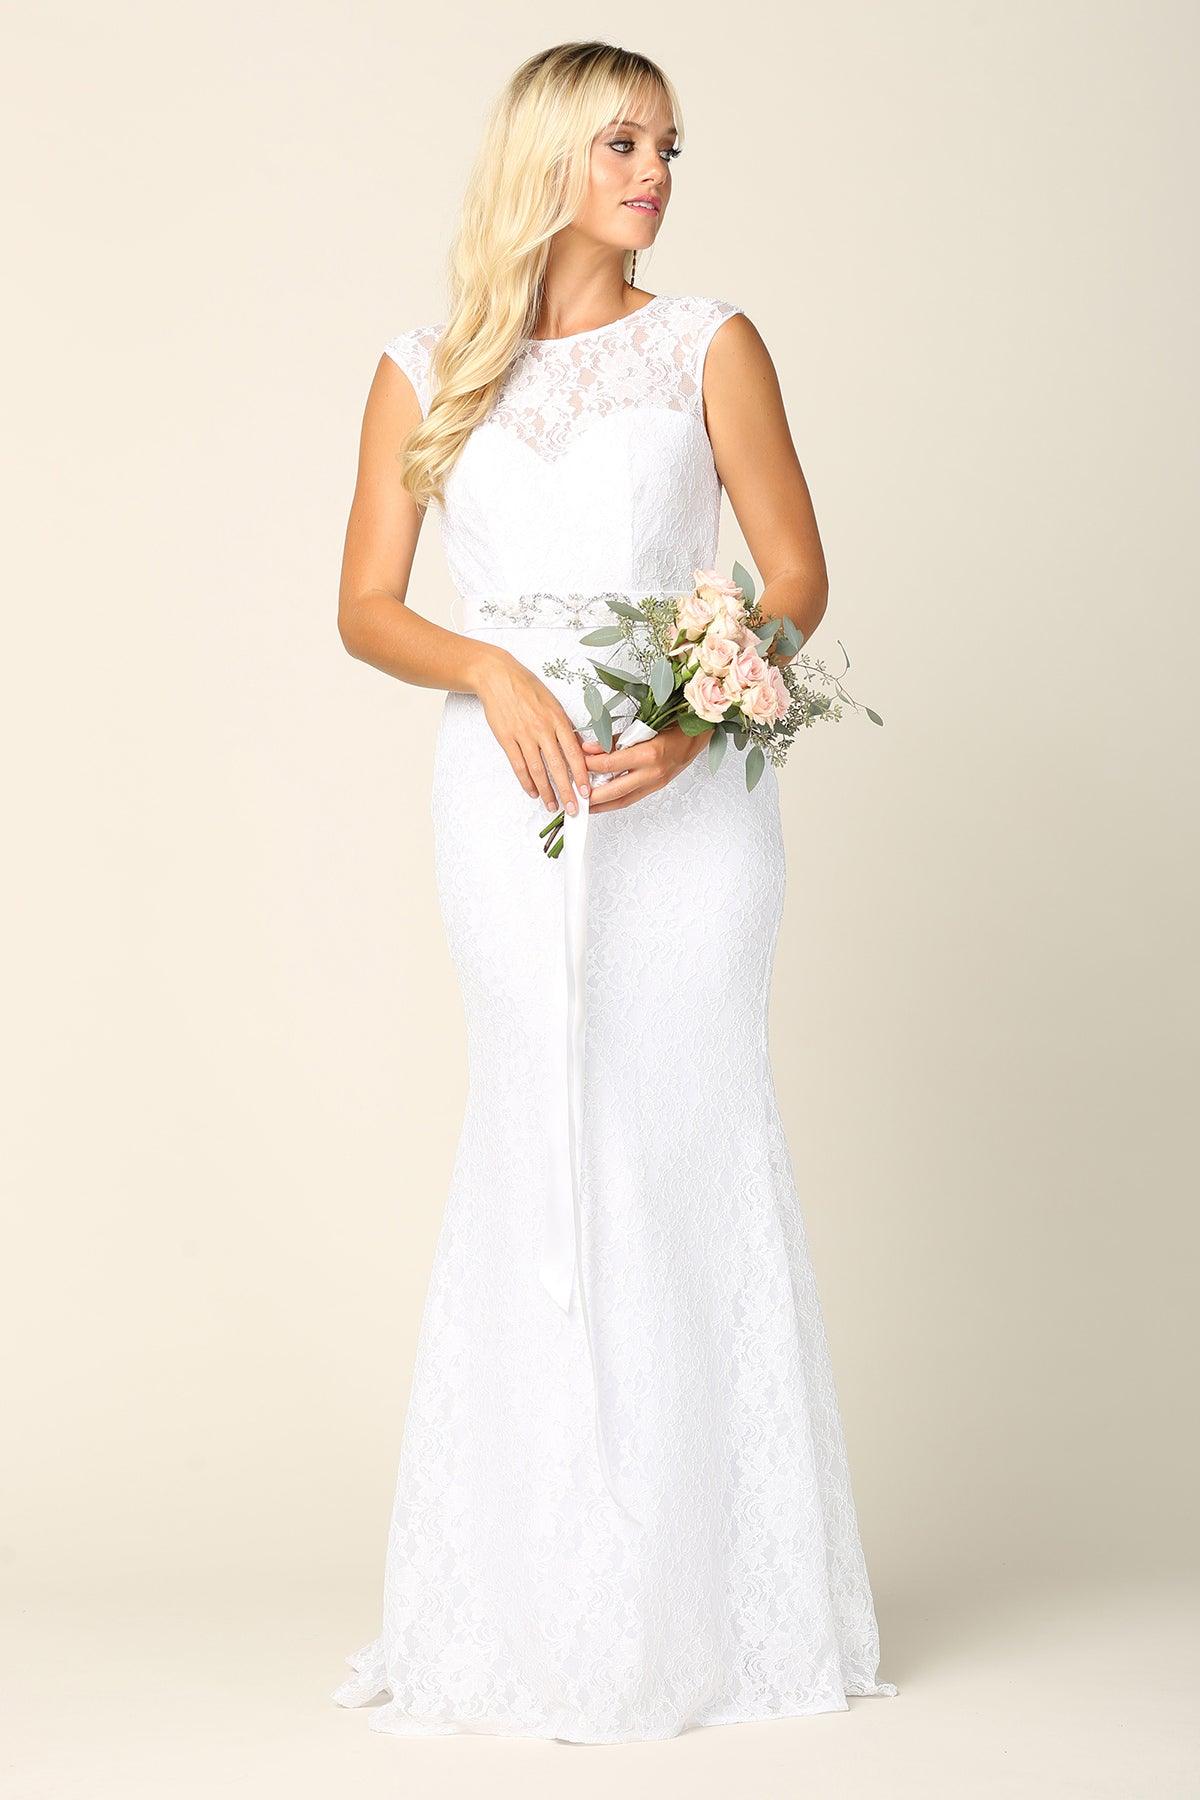 Simple Long Cap Sleeve Belted Lace Wedding Dress - The Dress Outlet